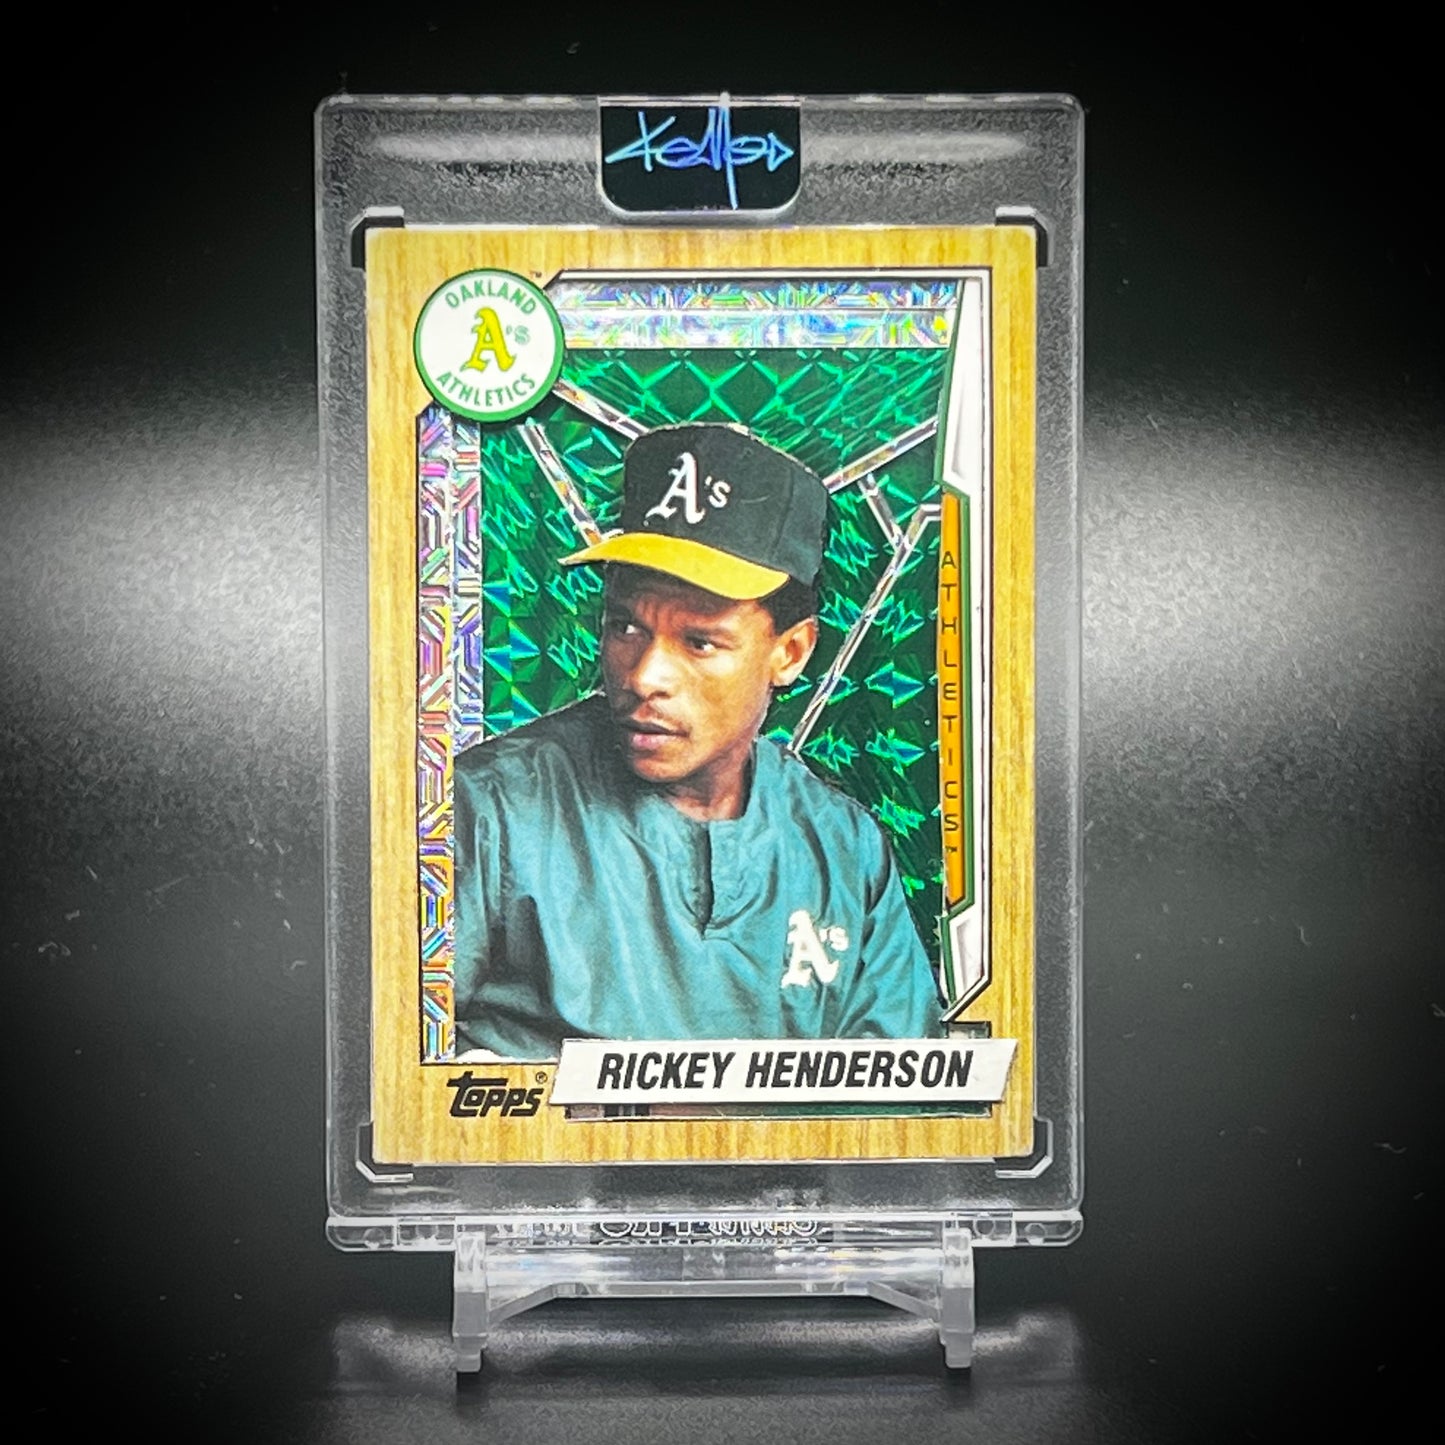 Rickey Henderson “Man of Steal” Art Card by KEMO